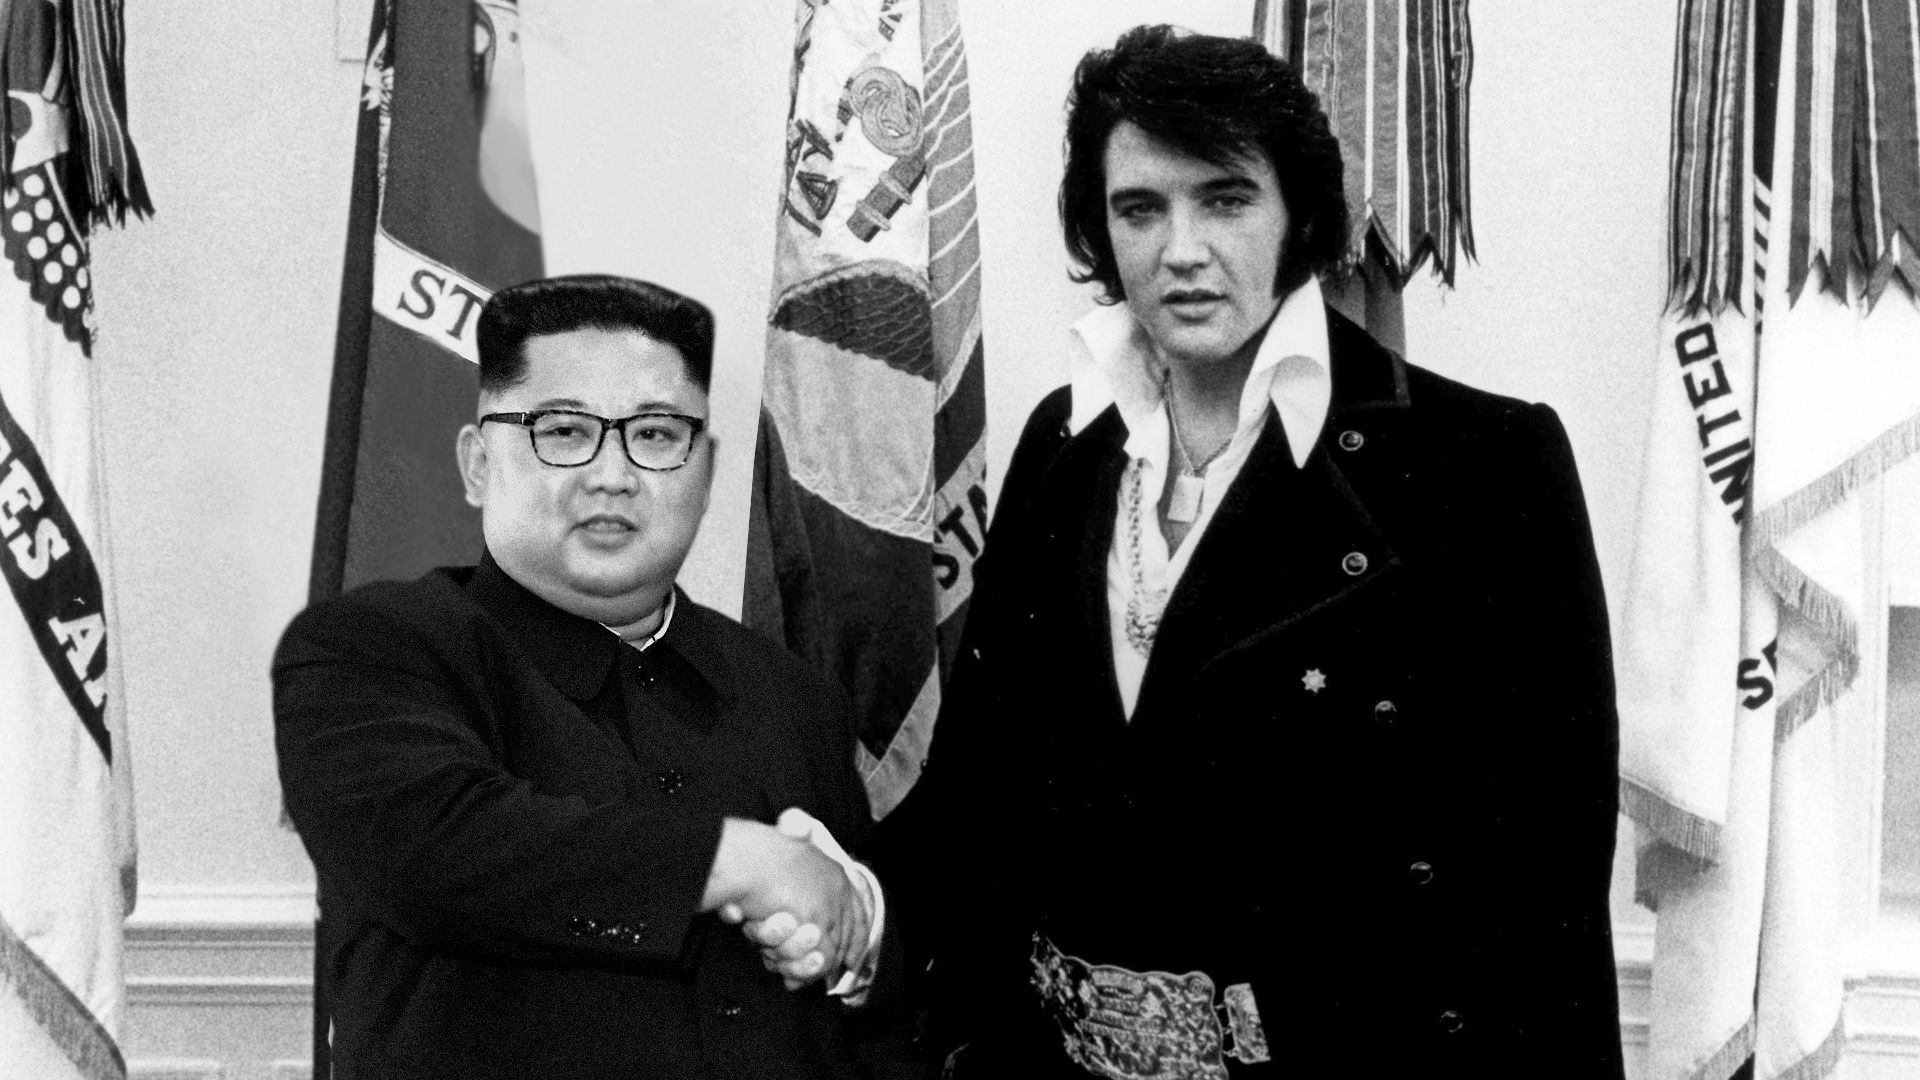 Altered image of Elvis shaking hands with Kim Jong-Un